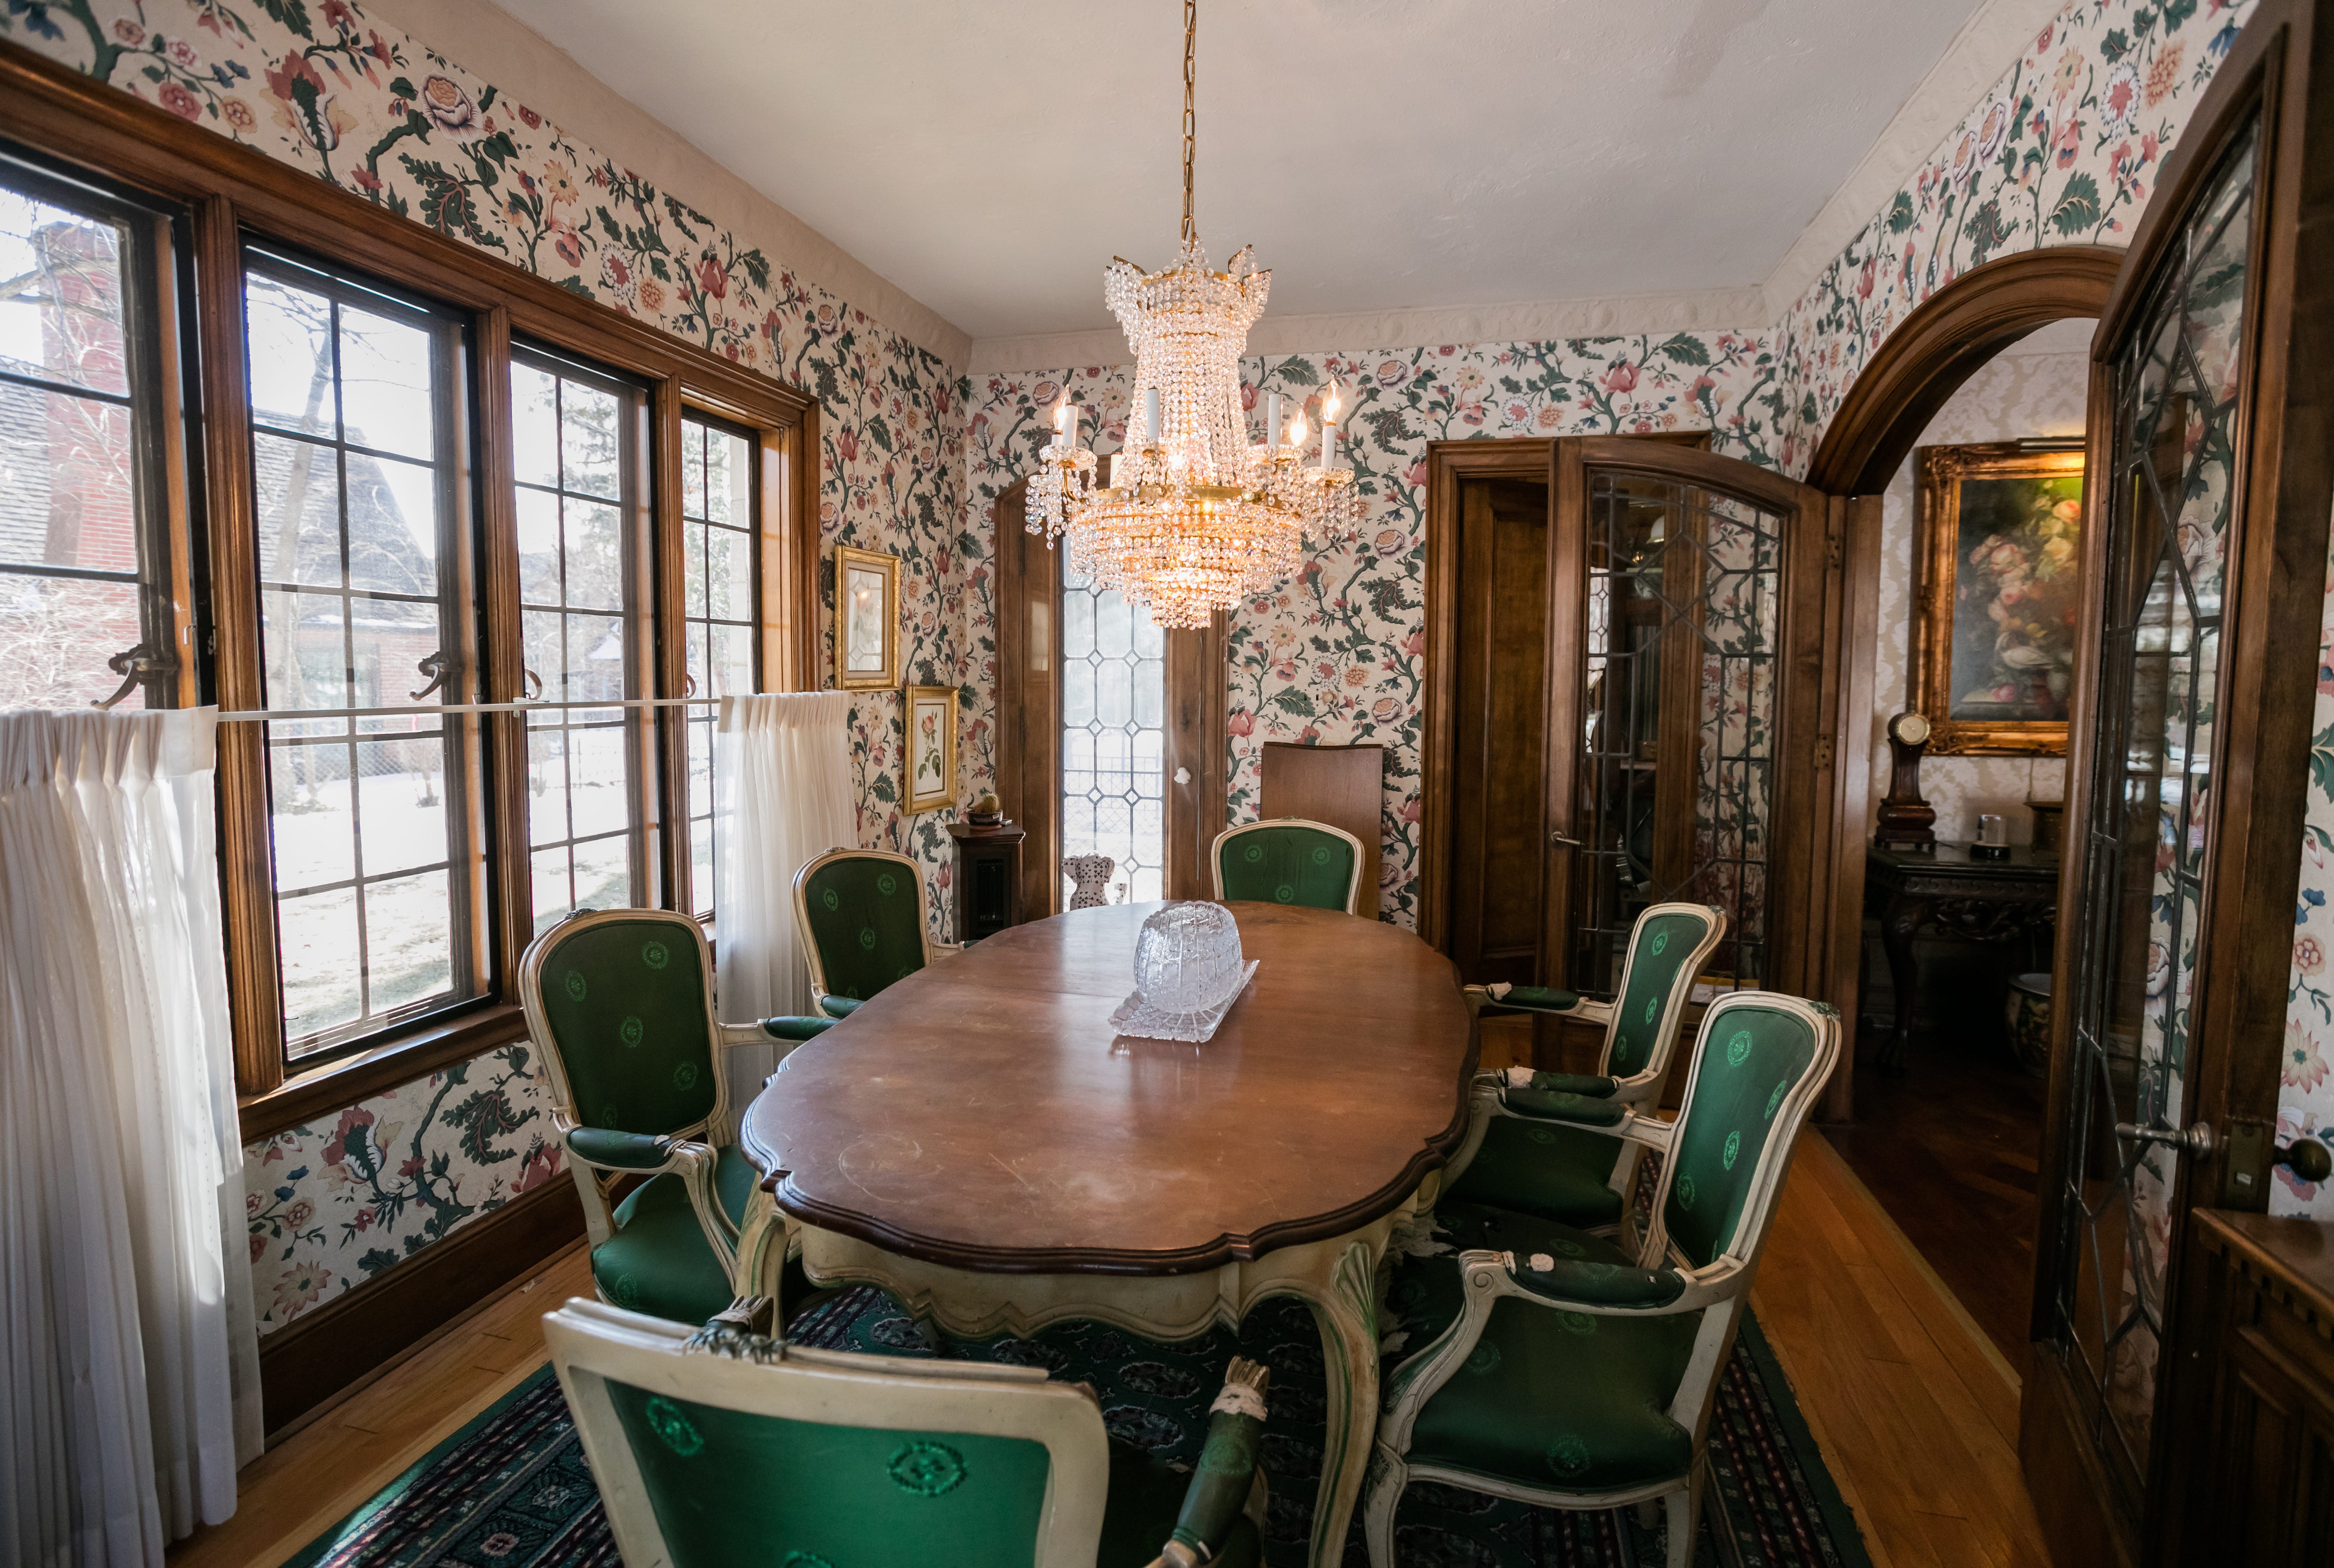 The home was designed and built in the roaring 1920's for the (Walter O.) Briggs family, the former owners of the Detroit Tigers," said realtor/investment specialist Daniel Treder of O'Conner Real Estate Development in Detroit.